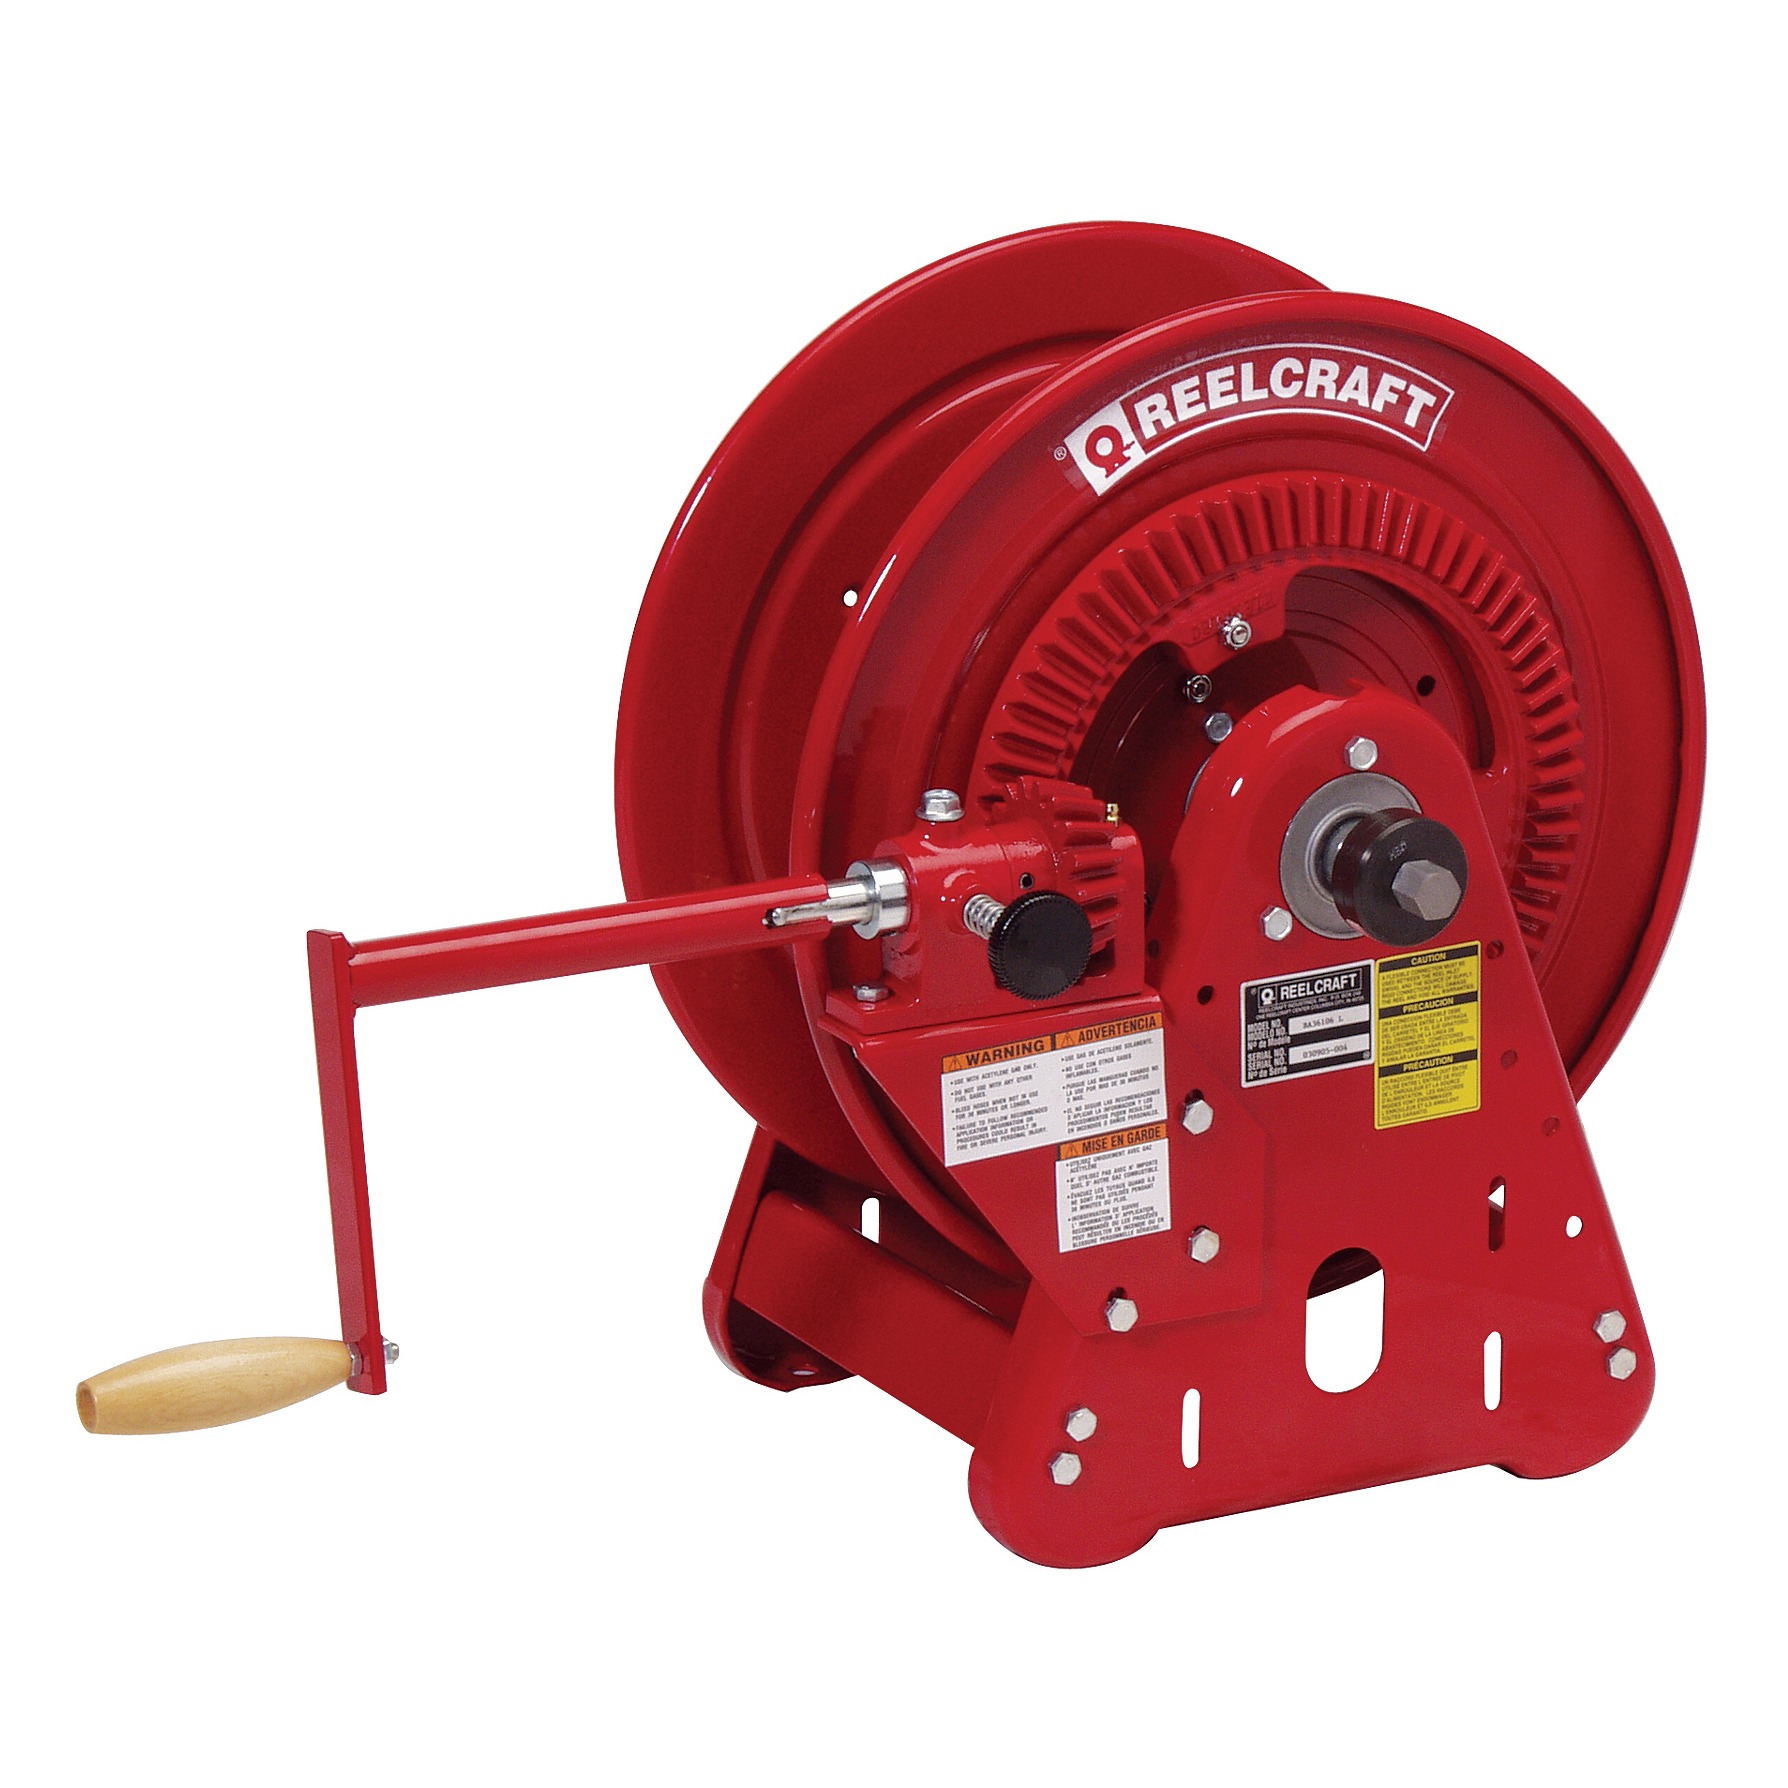 Reelcraft® Portable Hose Reel and Cart  Hoses, Nozzles, & Accessories -  Beacon Athletics